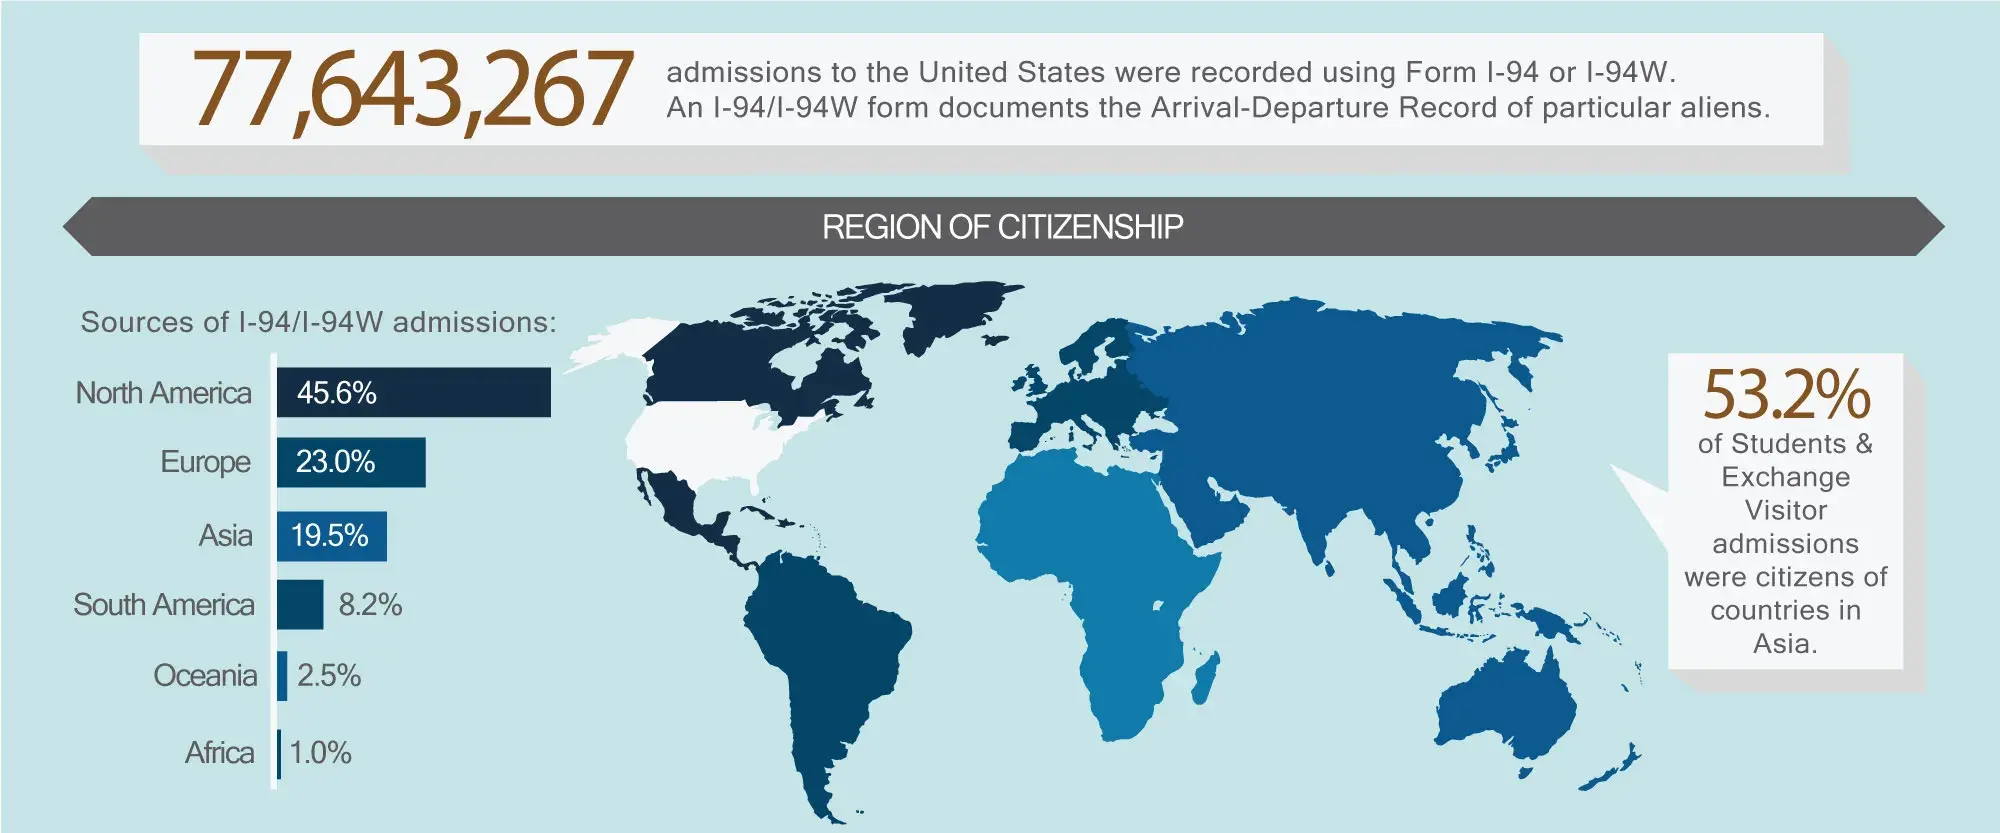 77,643,267 admissions to the United States were recorded using Form I-94 or I-94W. An I-94/I-94W form documents the Arrival-Departure Record of particular aliens. Sources of I-94/I-94W admissions: North America, 45.6%; Europe, 23.0%; Asia, 19.5%; South America, 8.2%; Oceania, 2.5%; Africa, 1.0%. 53.2% of all Students & Exchange Visitor admissions were citizens of countries in Asia.